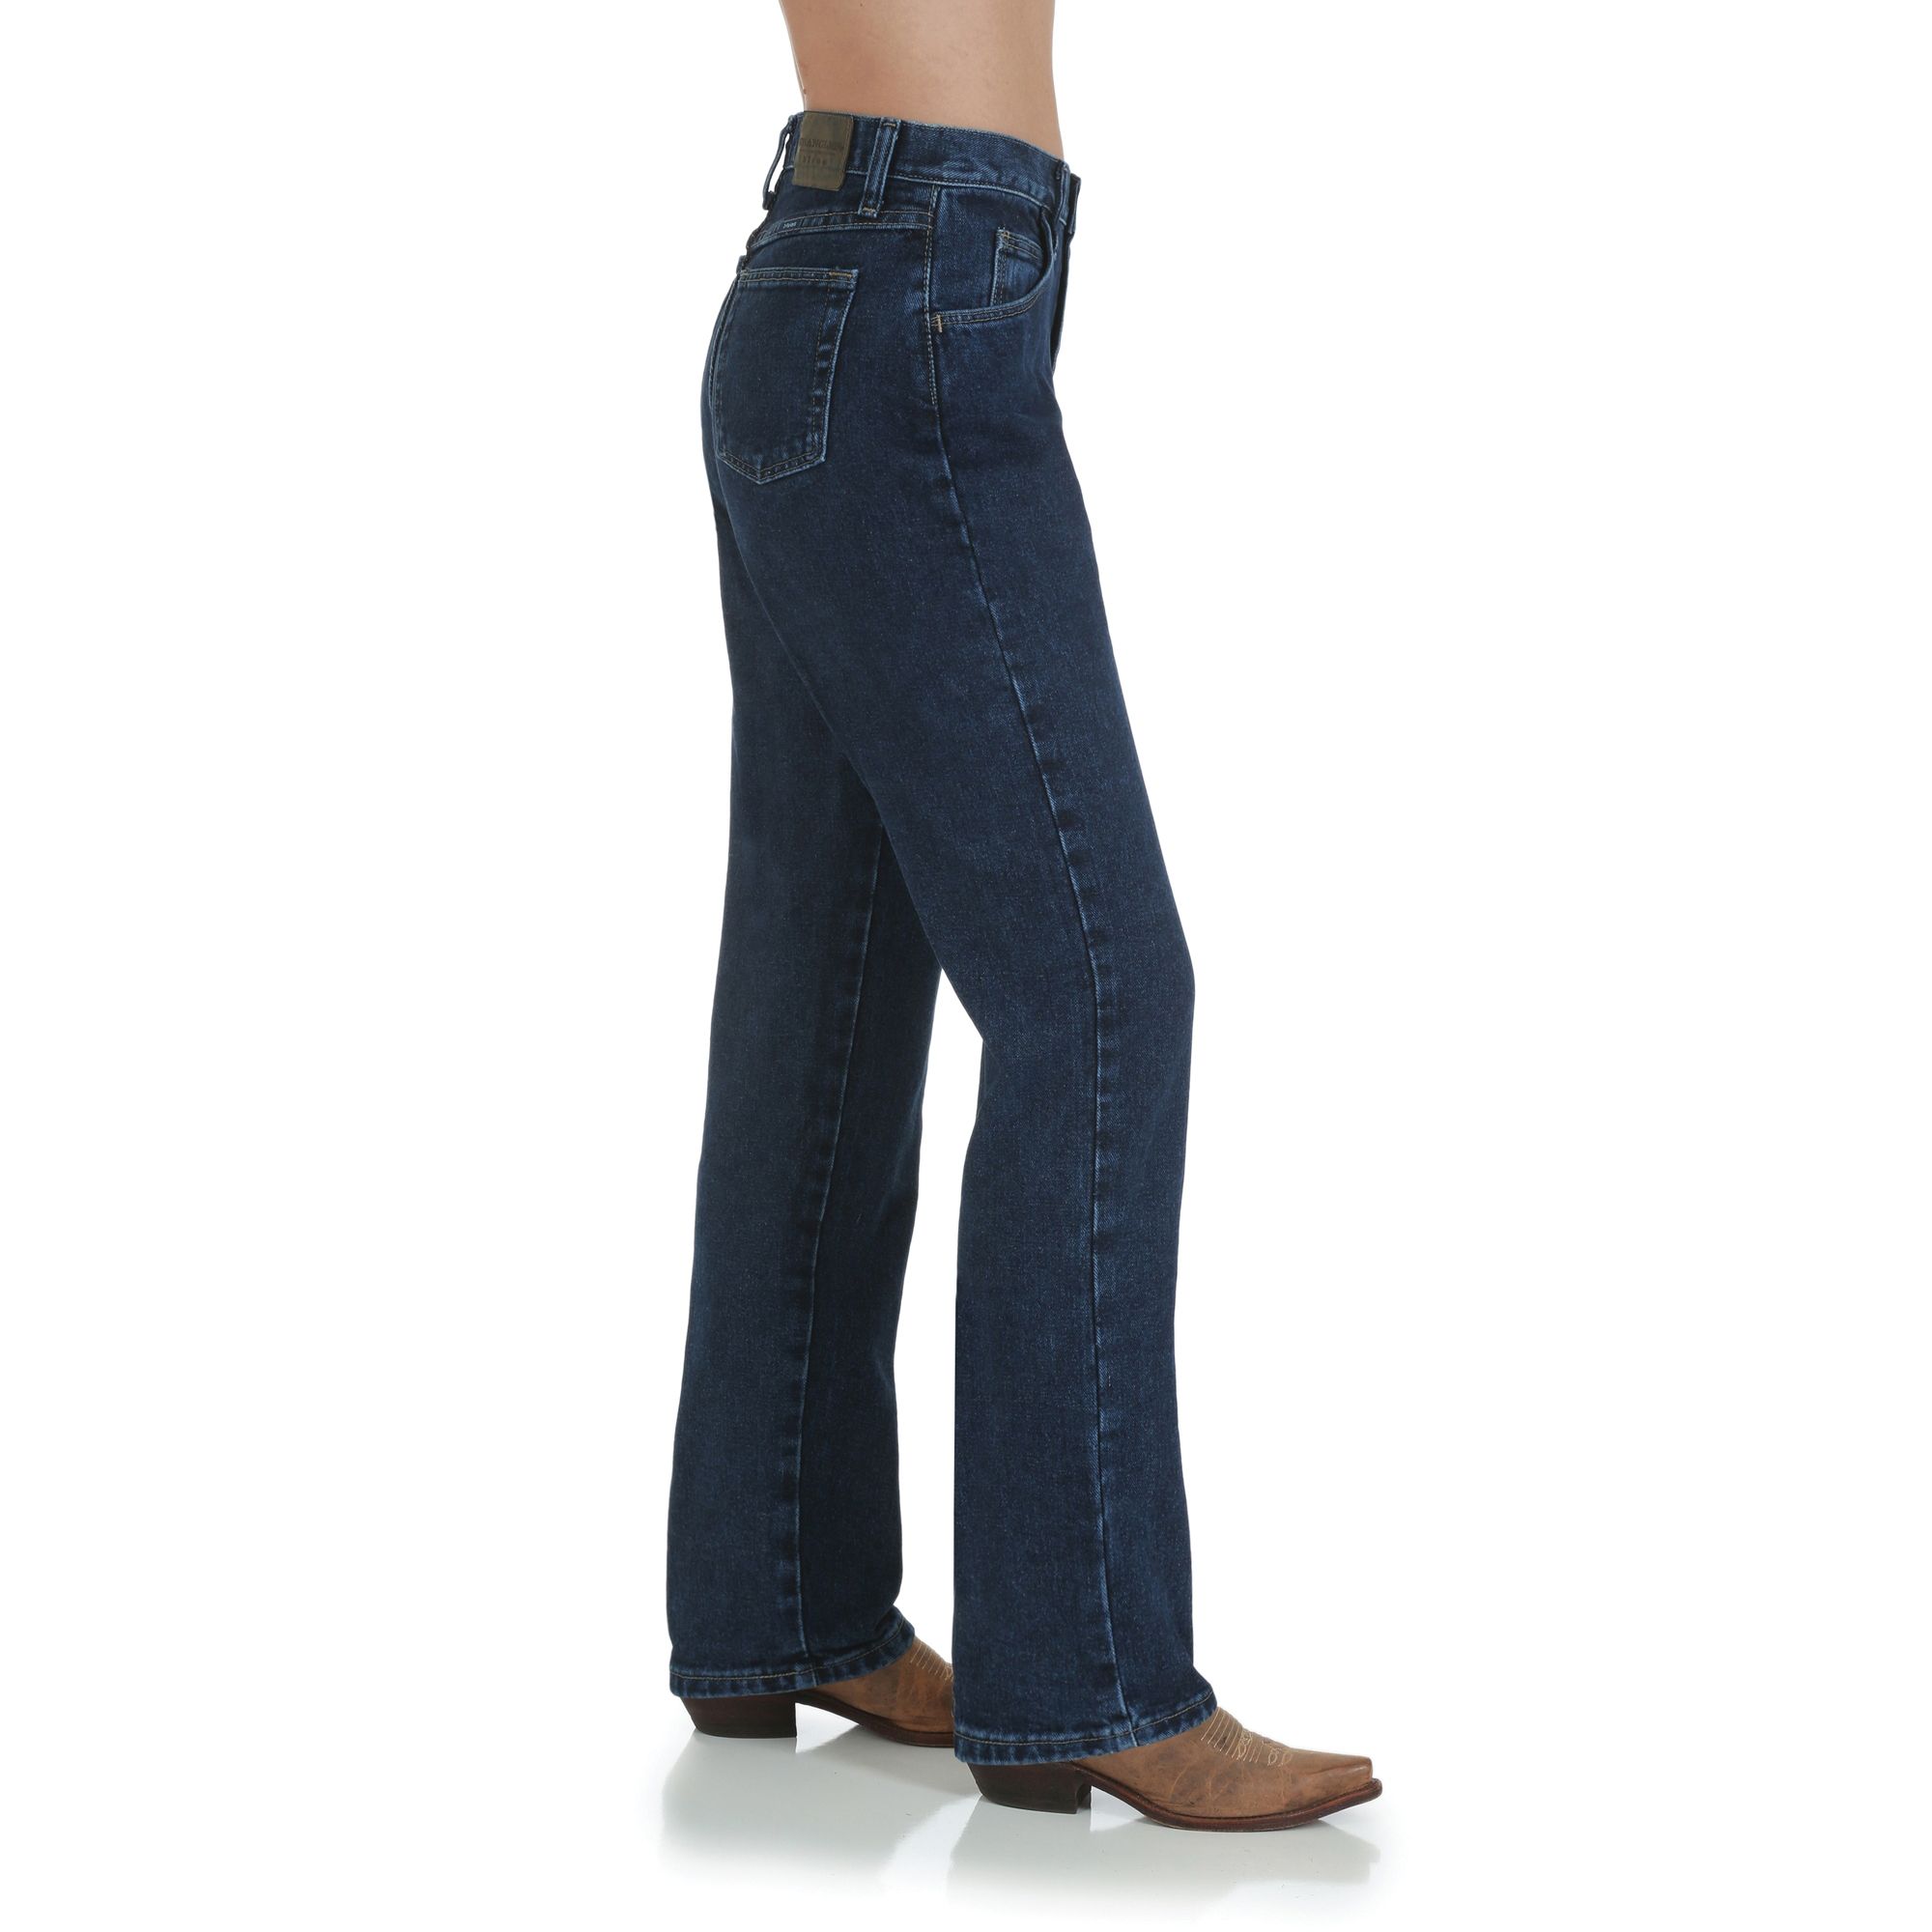 Wrangler® Blues Women's Relaxed Fit Jeans